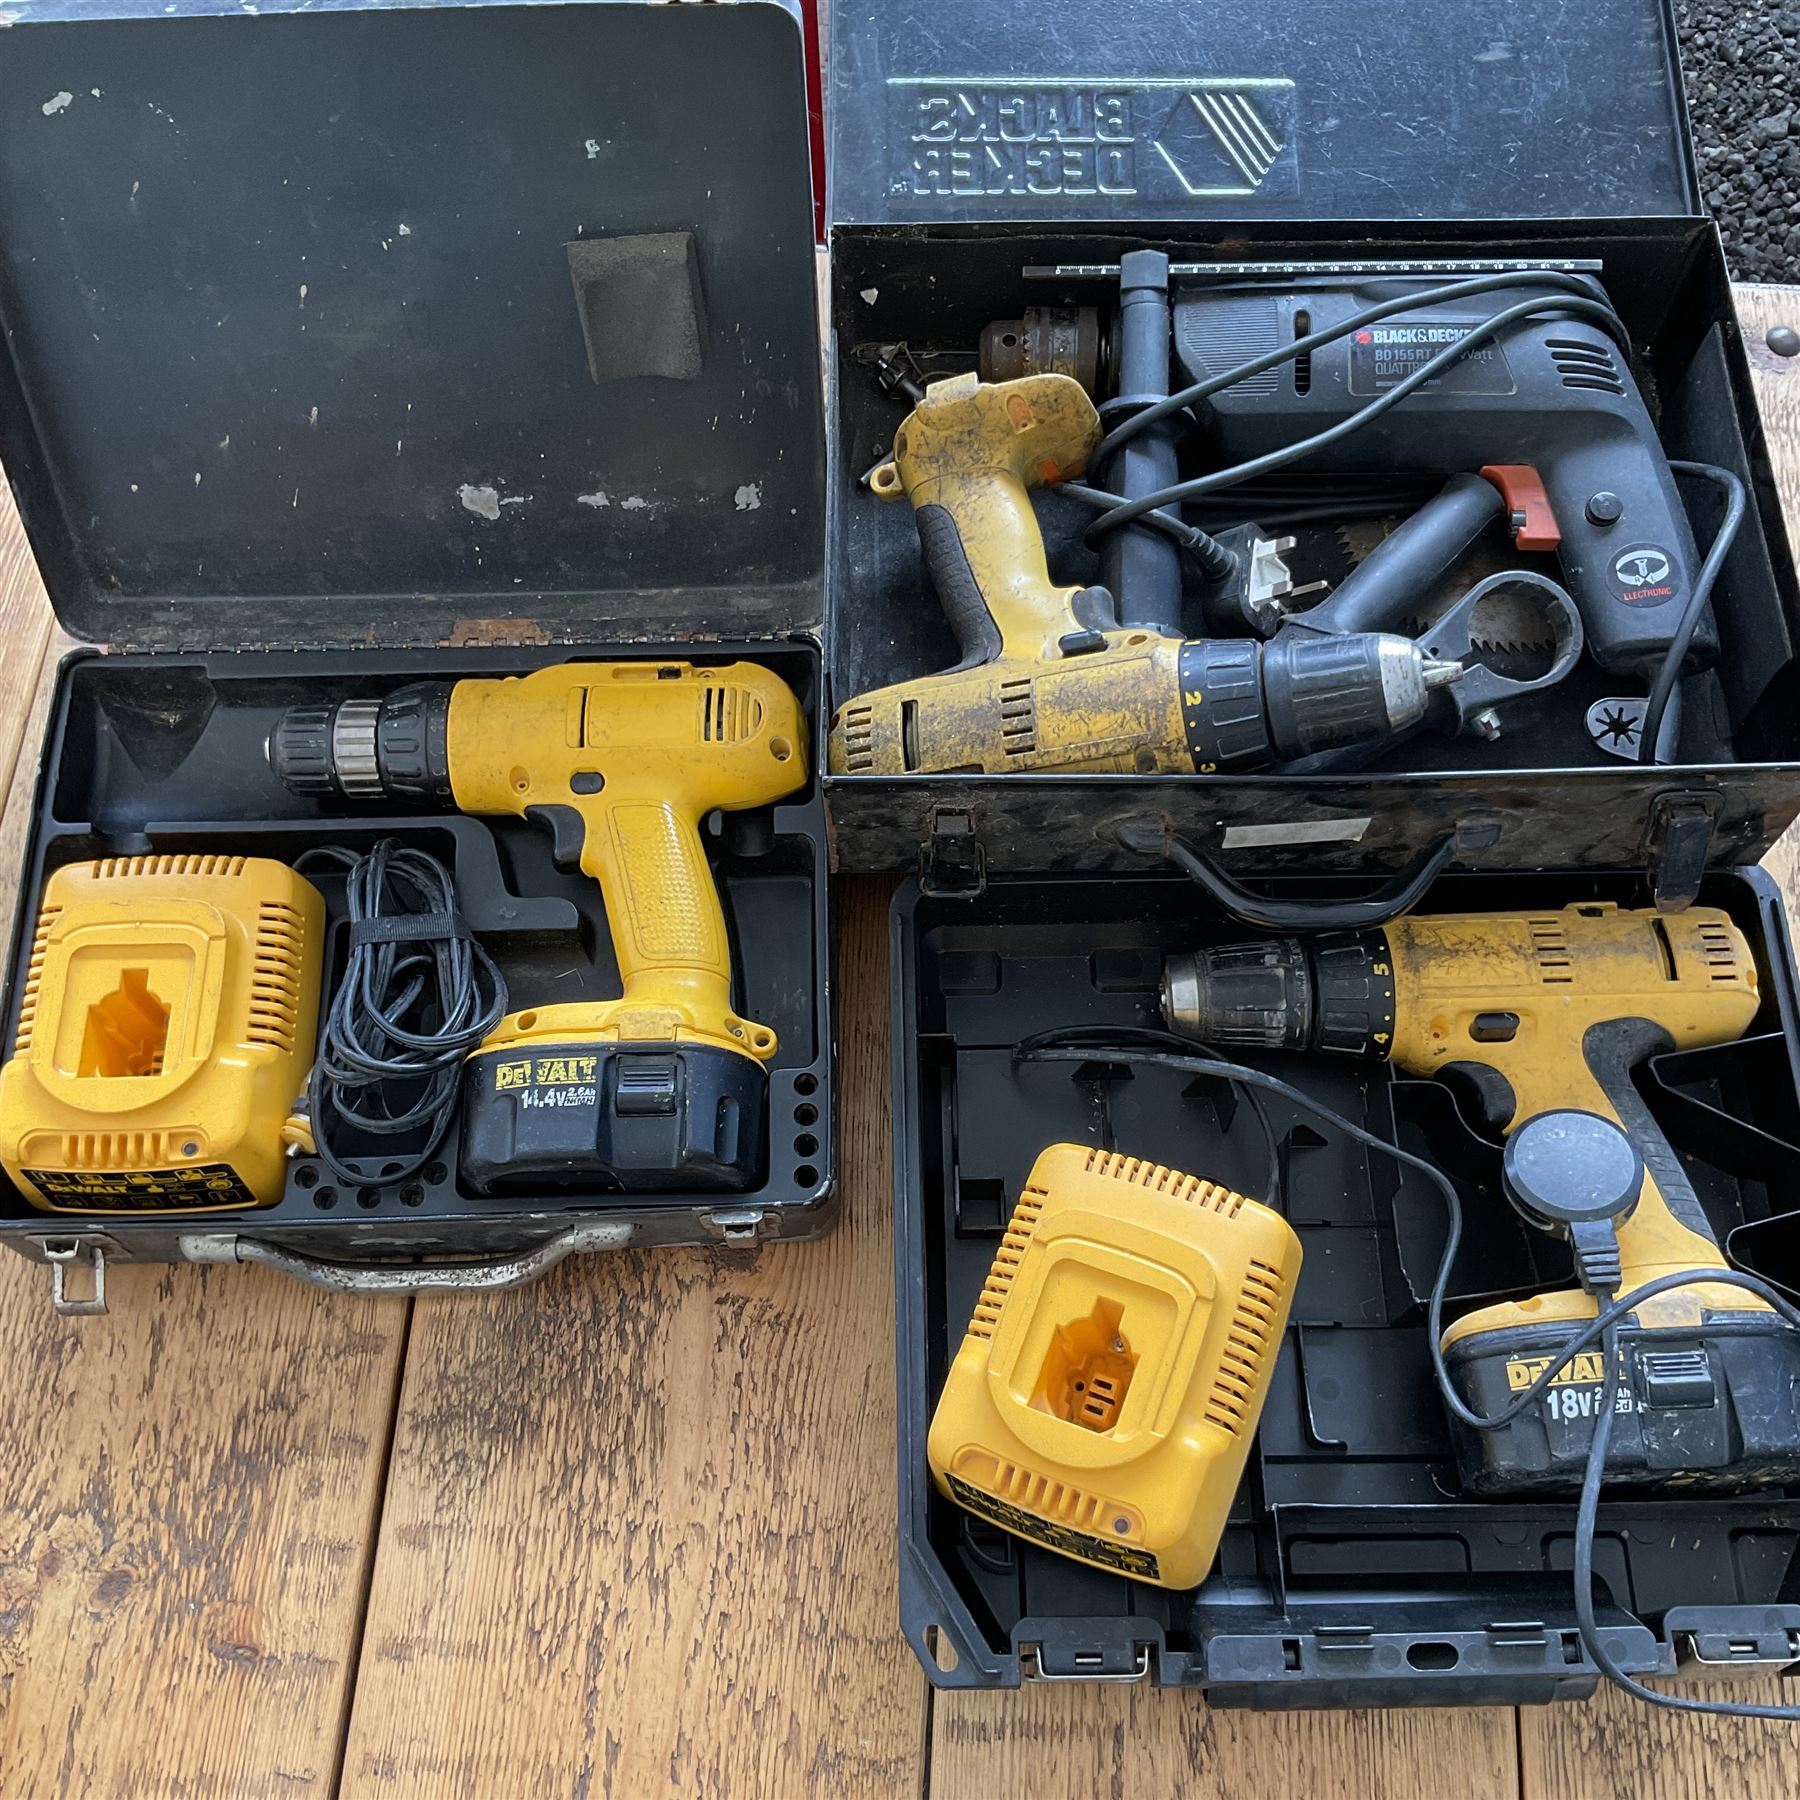 Three DeWalt battery drills with batteries and charger and black and decker corded drill - THIS LOT